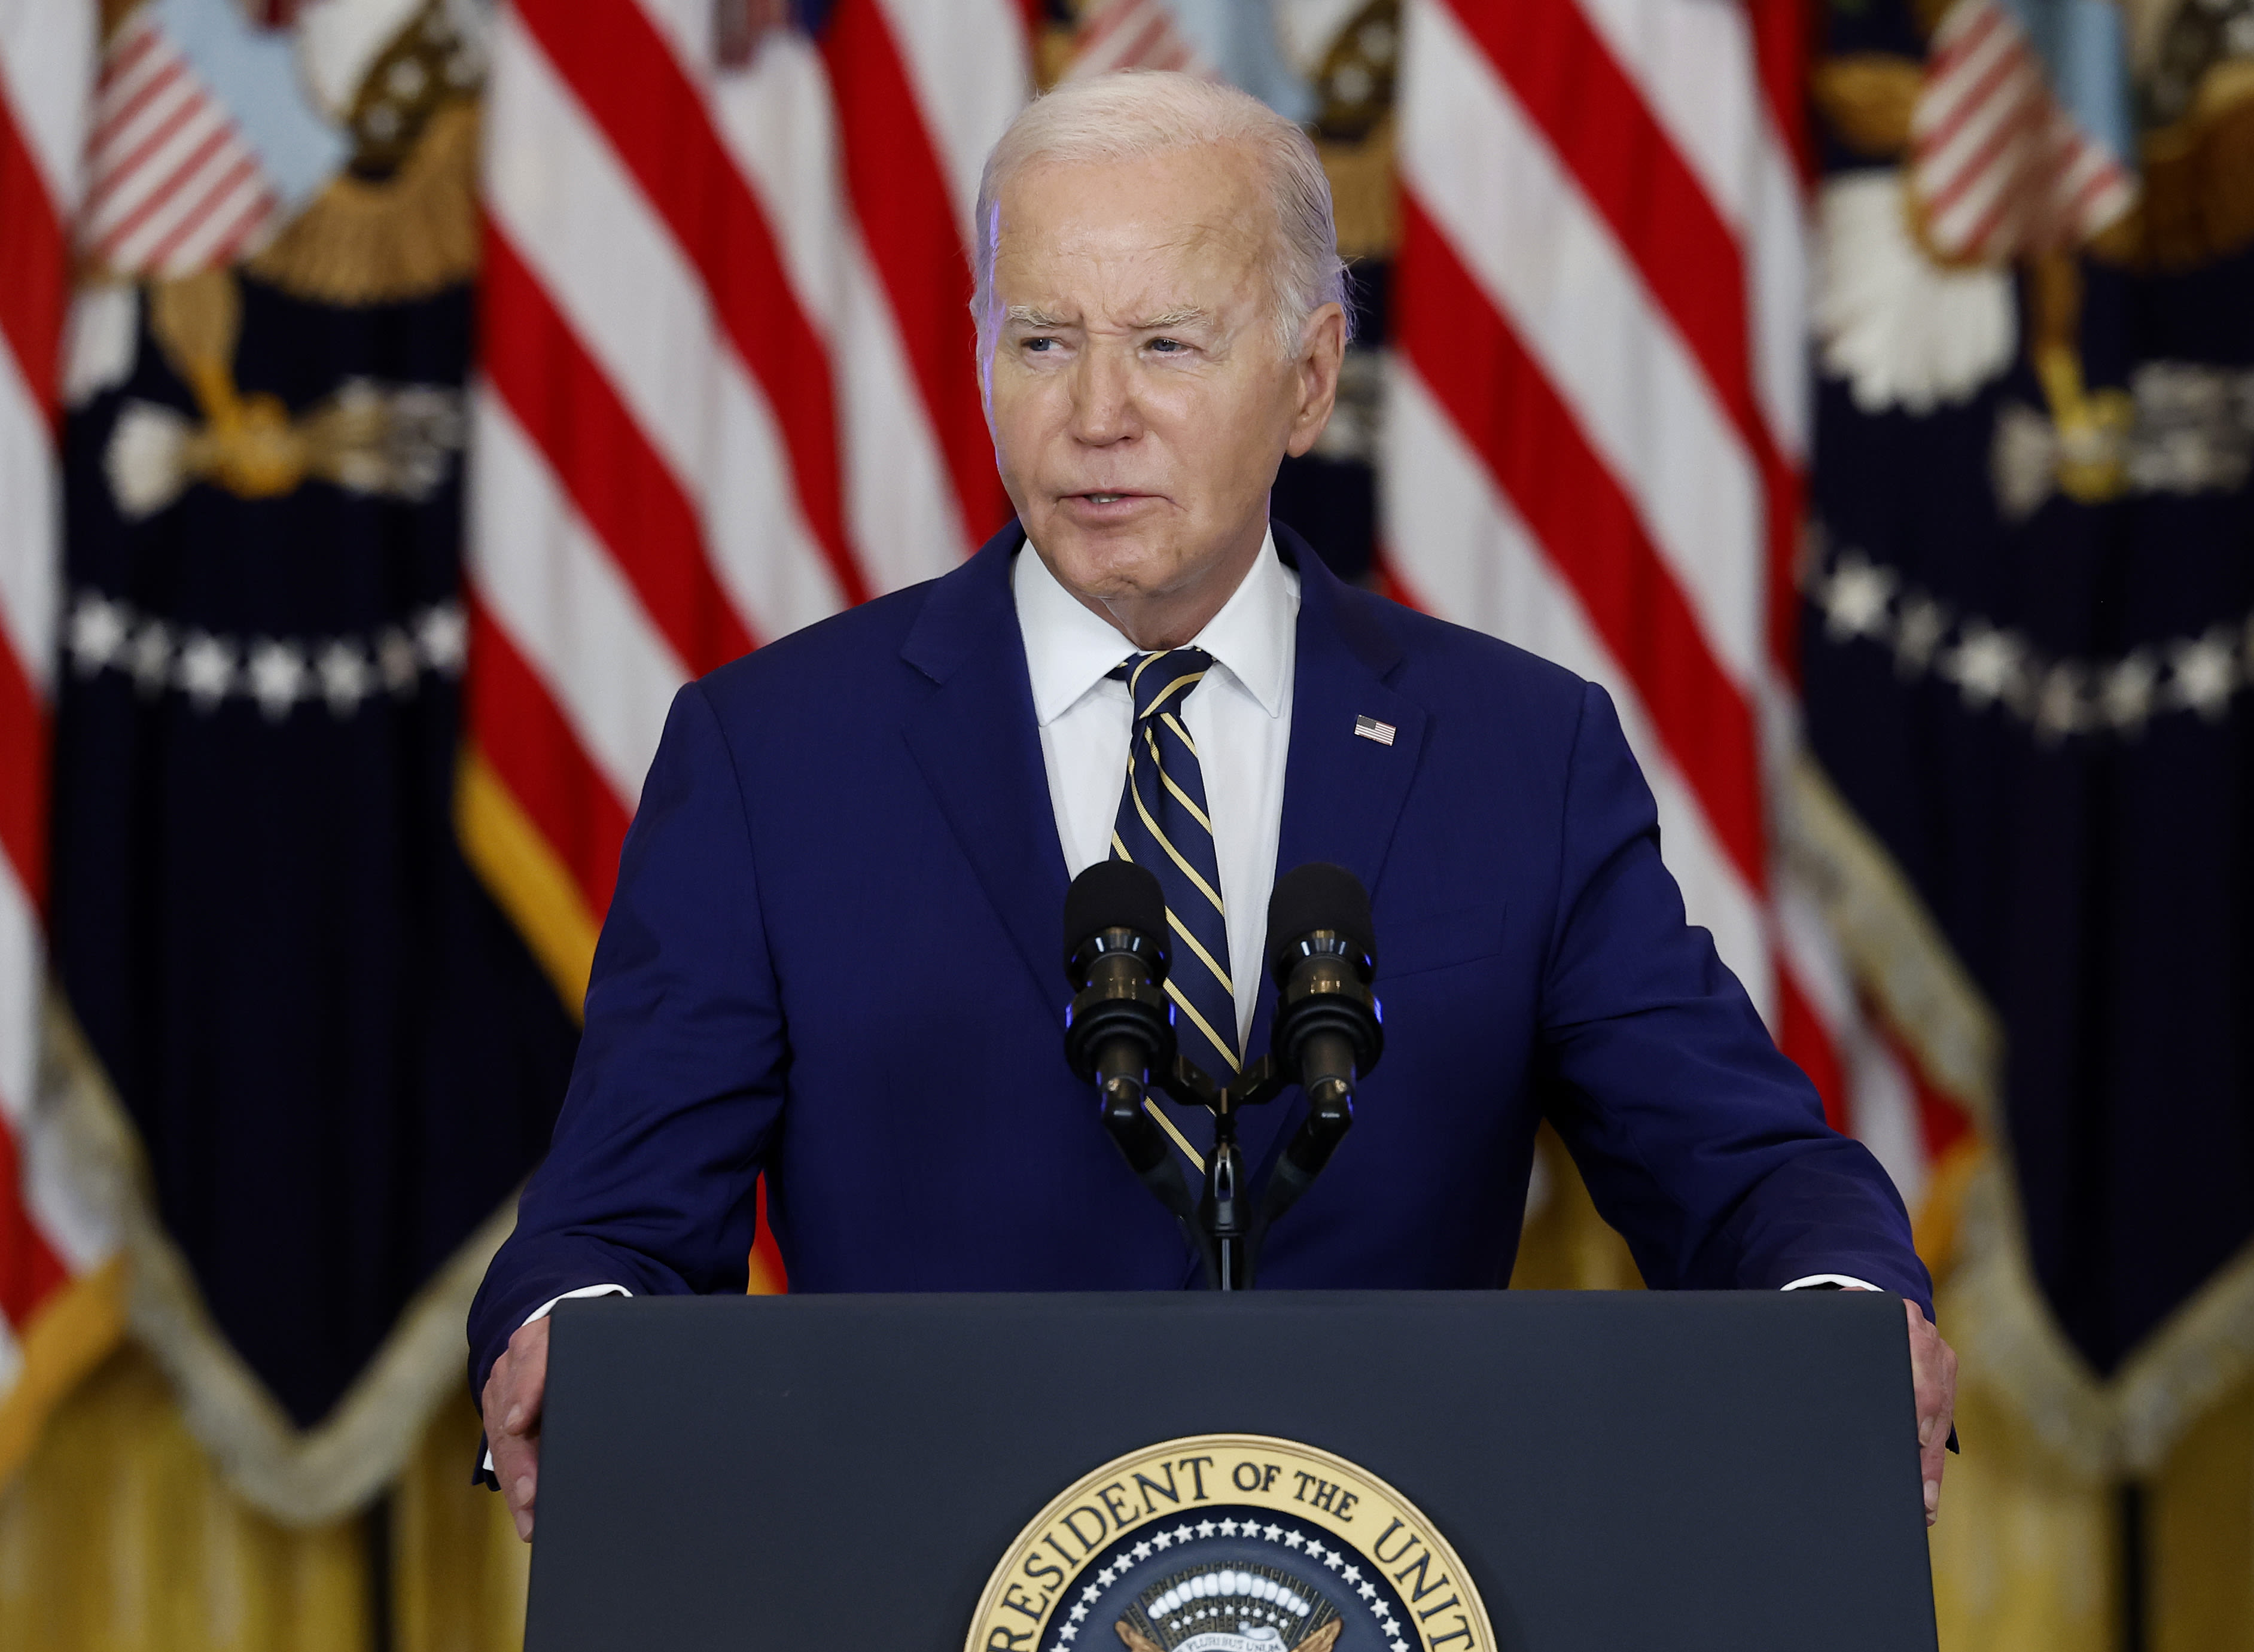 Joe Biden blasted by Democrats for new southern border move